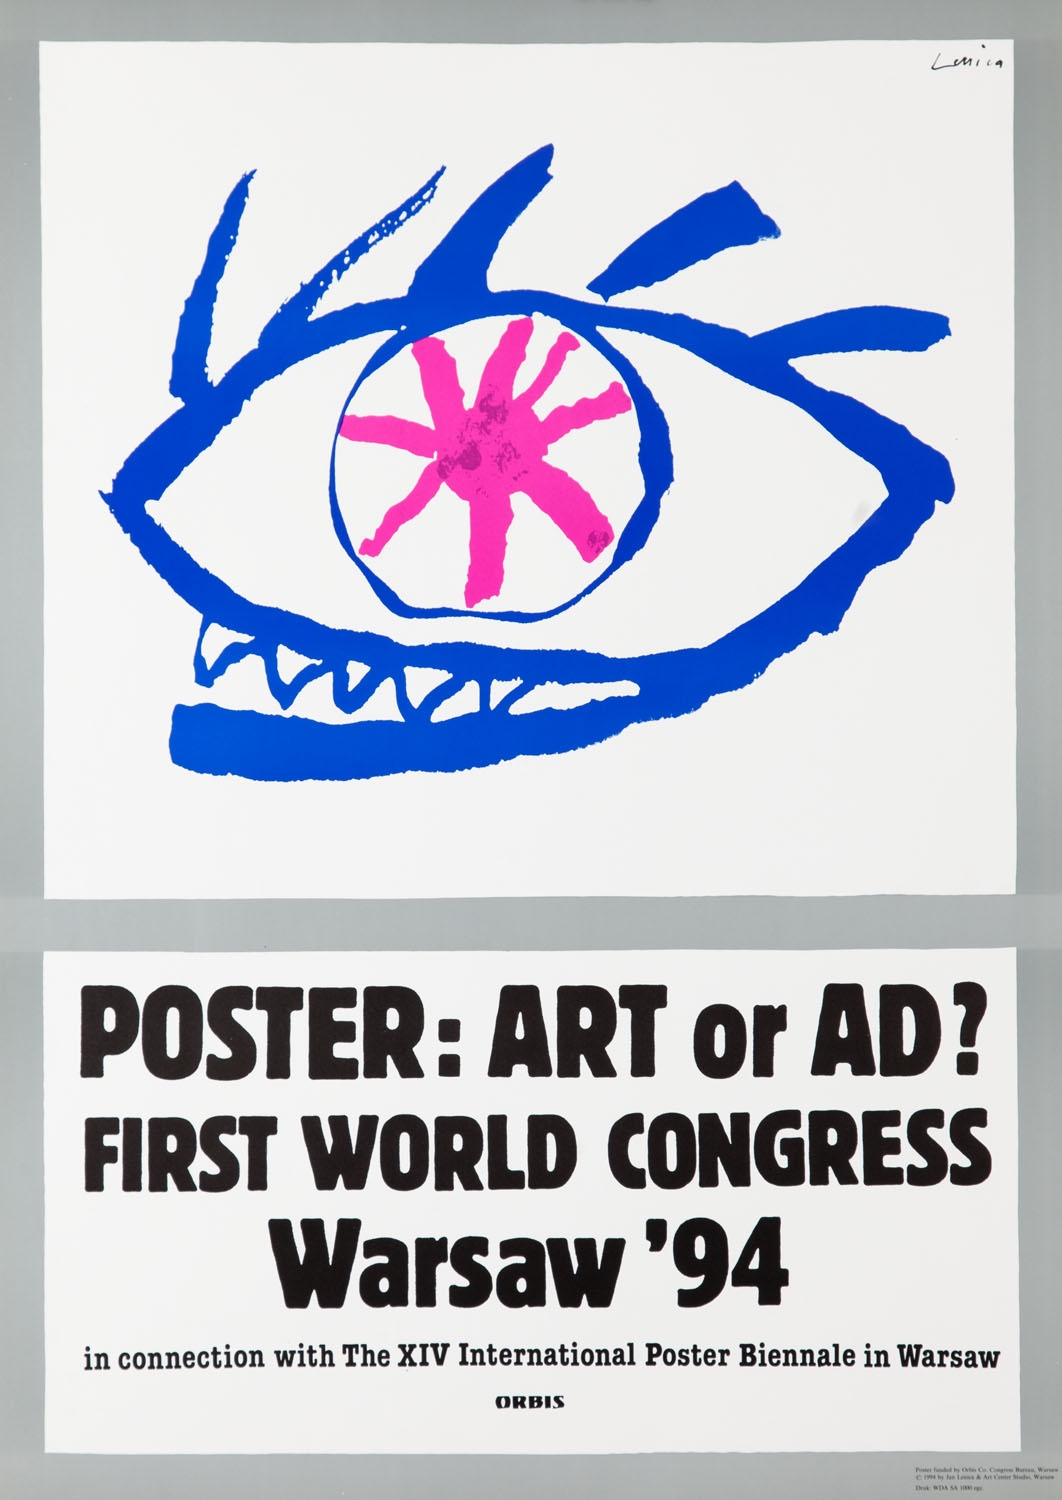 Plakat "Poster: Art of Ad? First World Congress Warsaw '94' by Jan Lenica, 1994